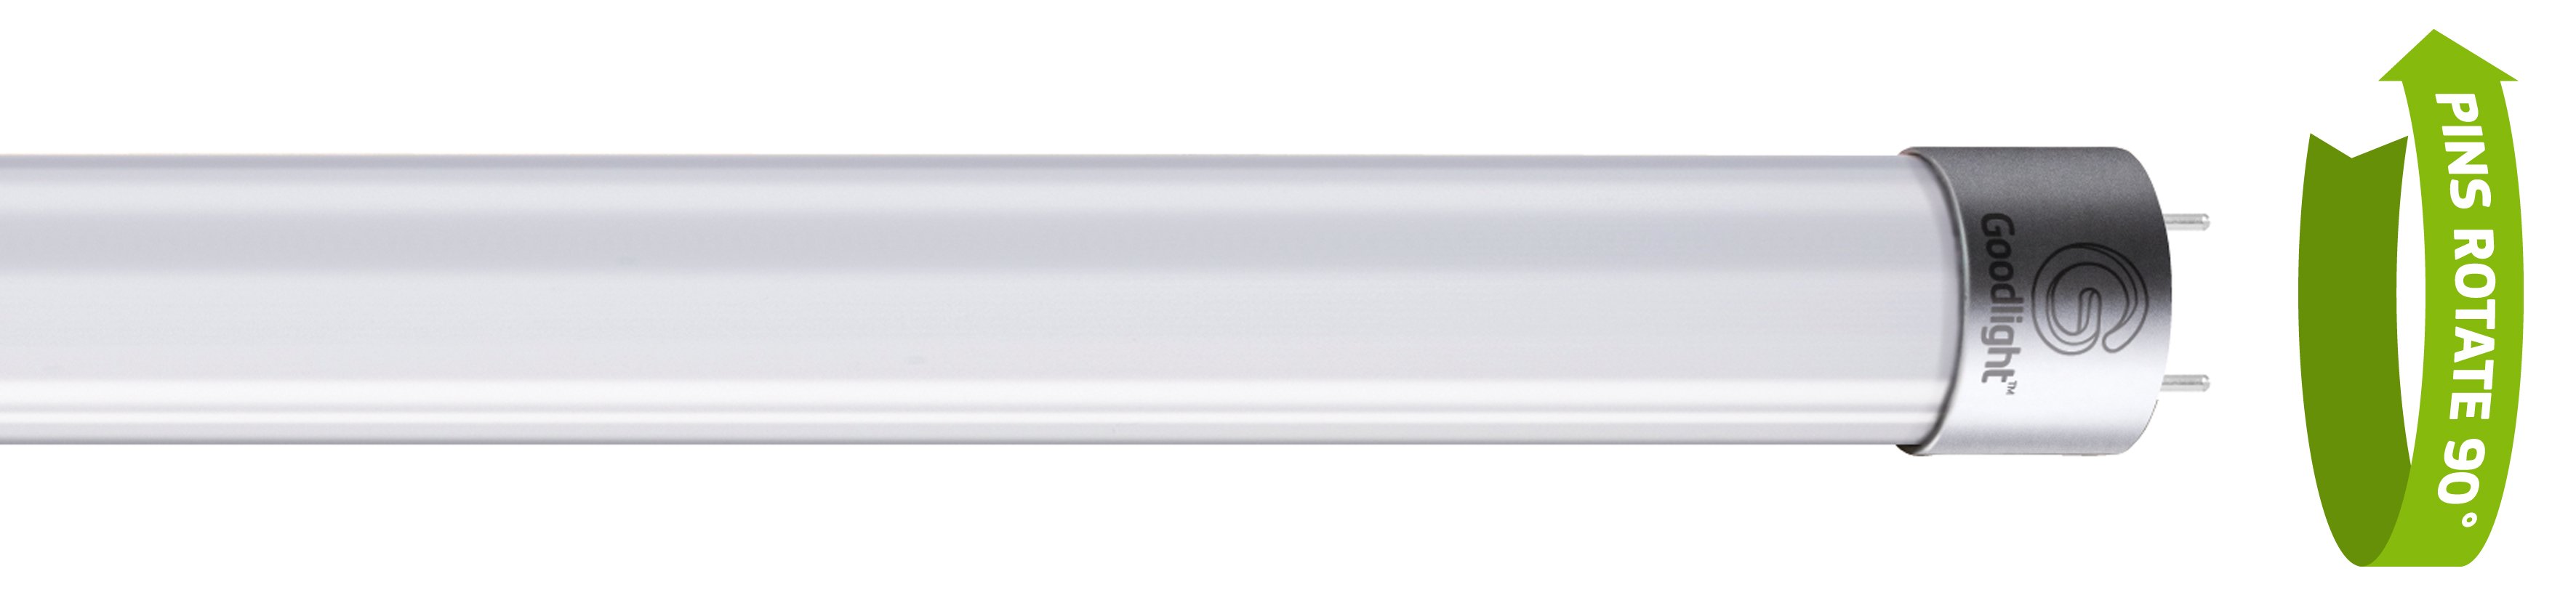 Goodlight T8 LED Tube with rotation